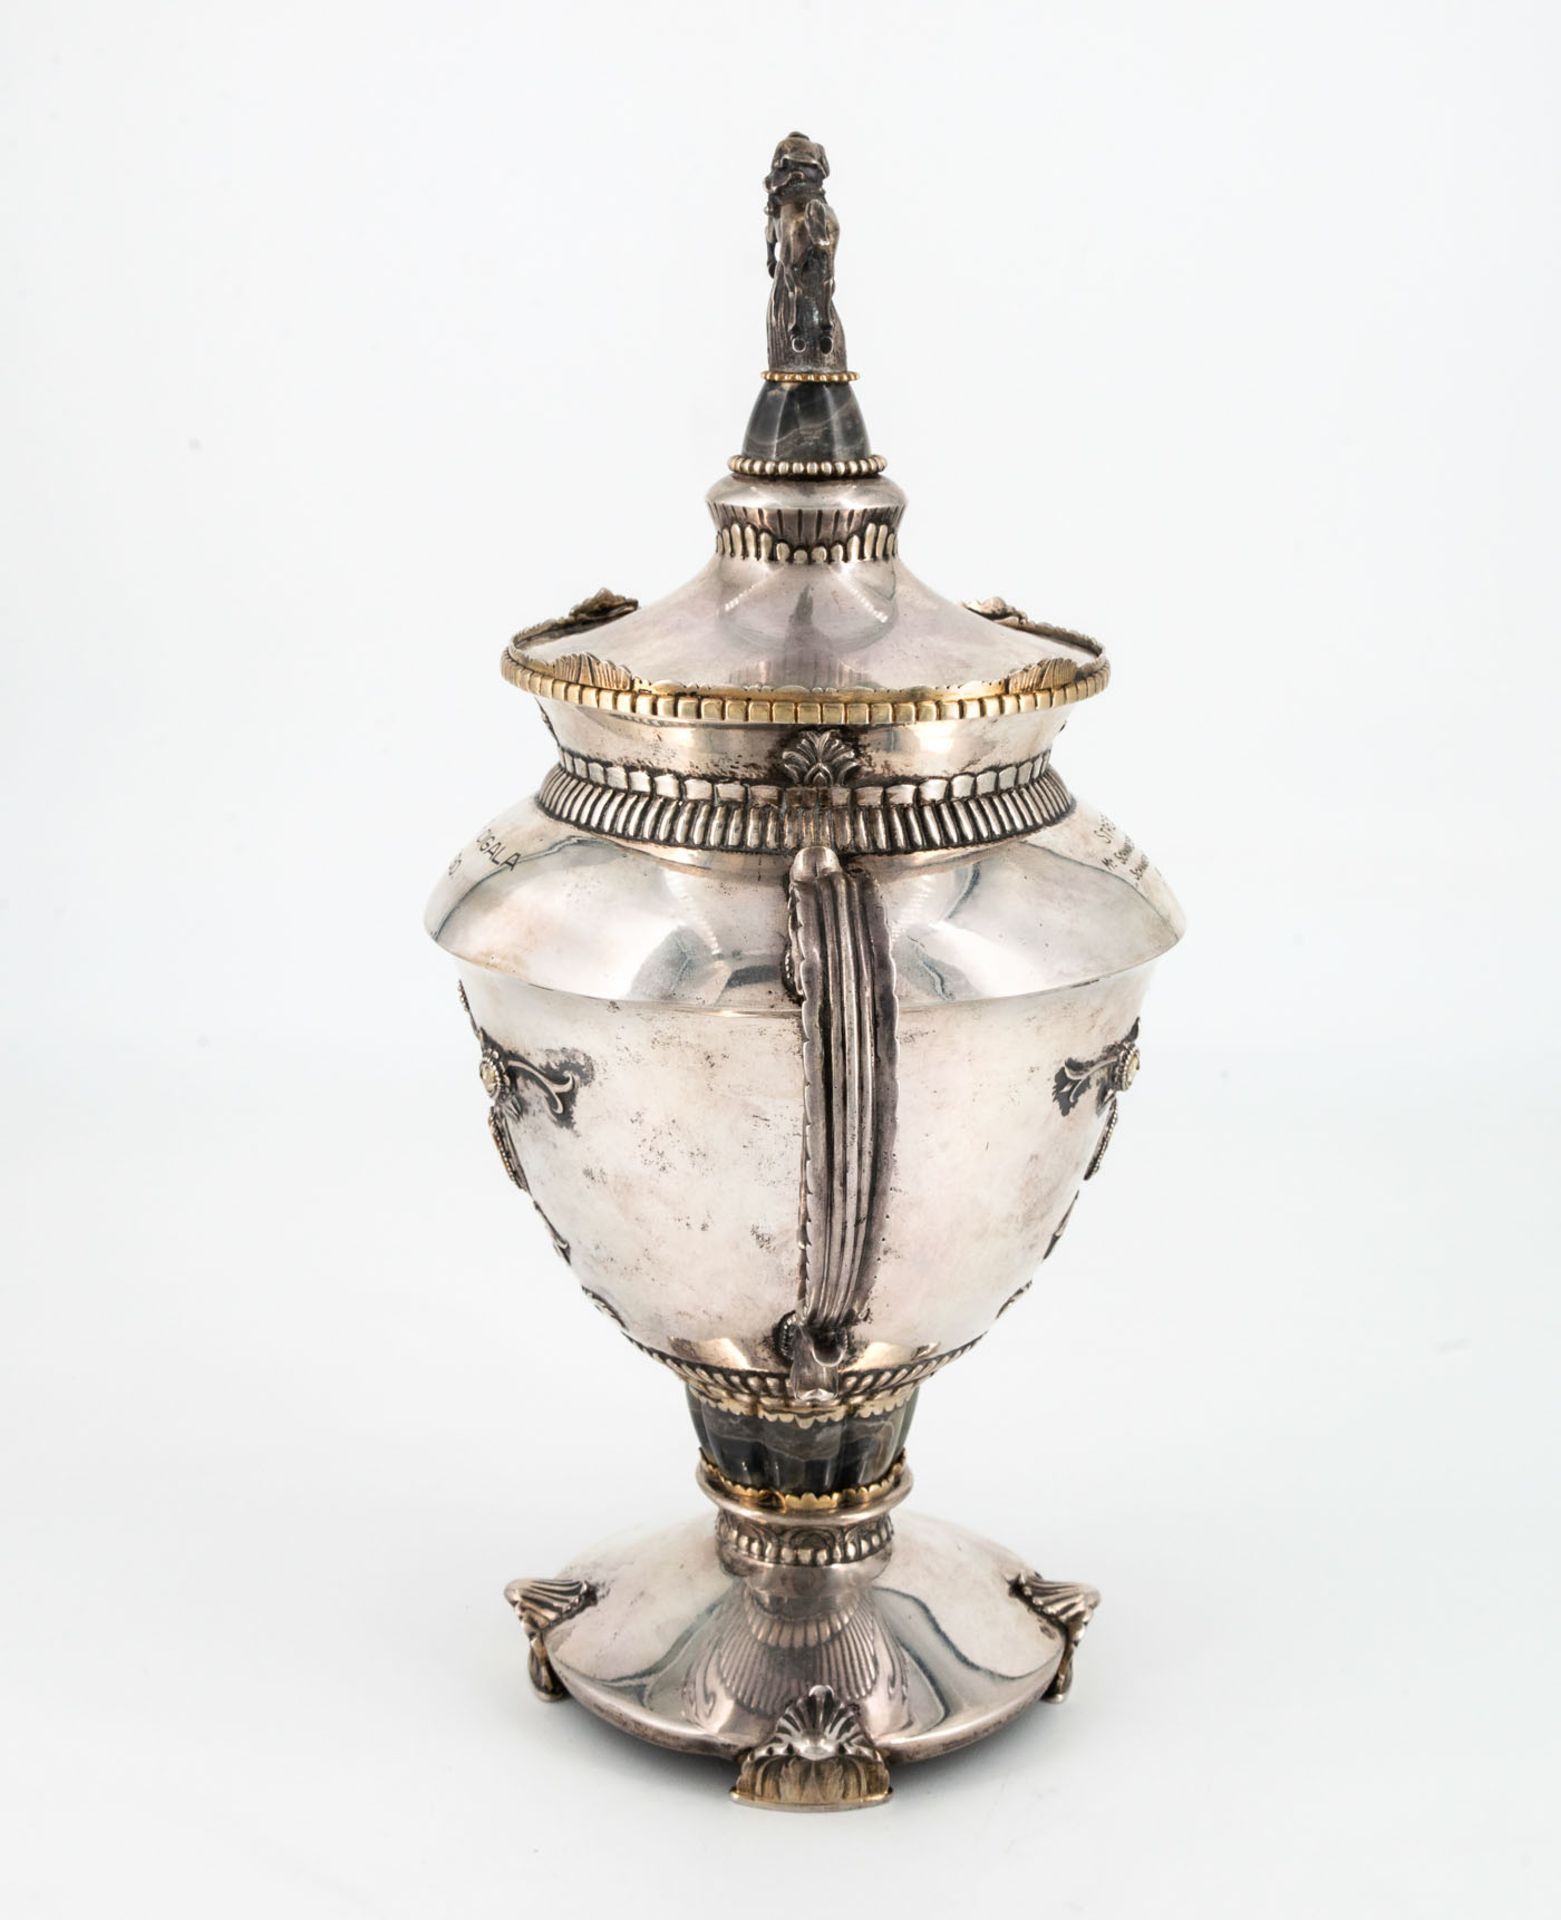 A Fine Silver and Parcel Gilt Presentation Goblet, Austro-Hungary, Early 20th Century - Image 3 of 7